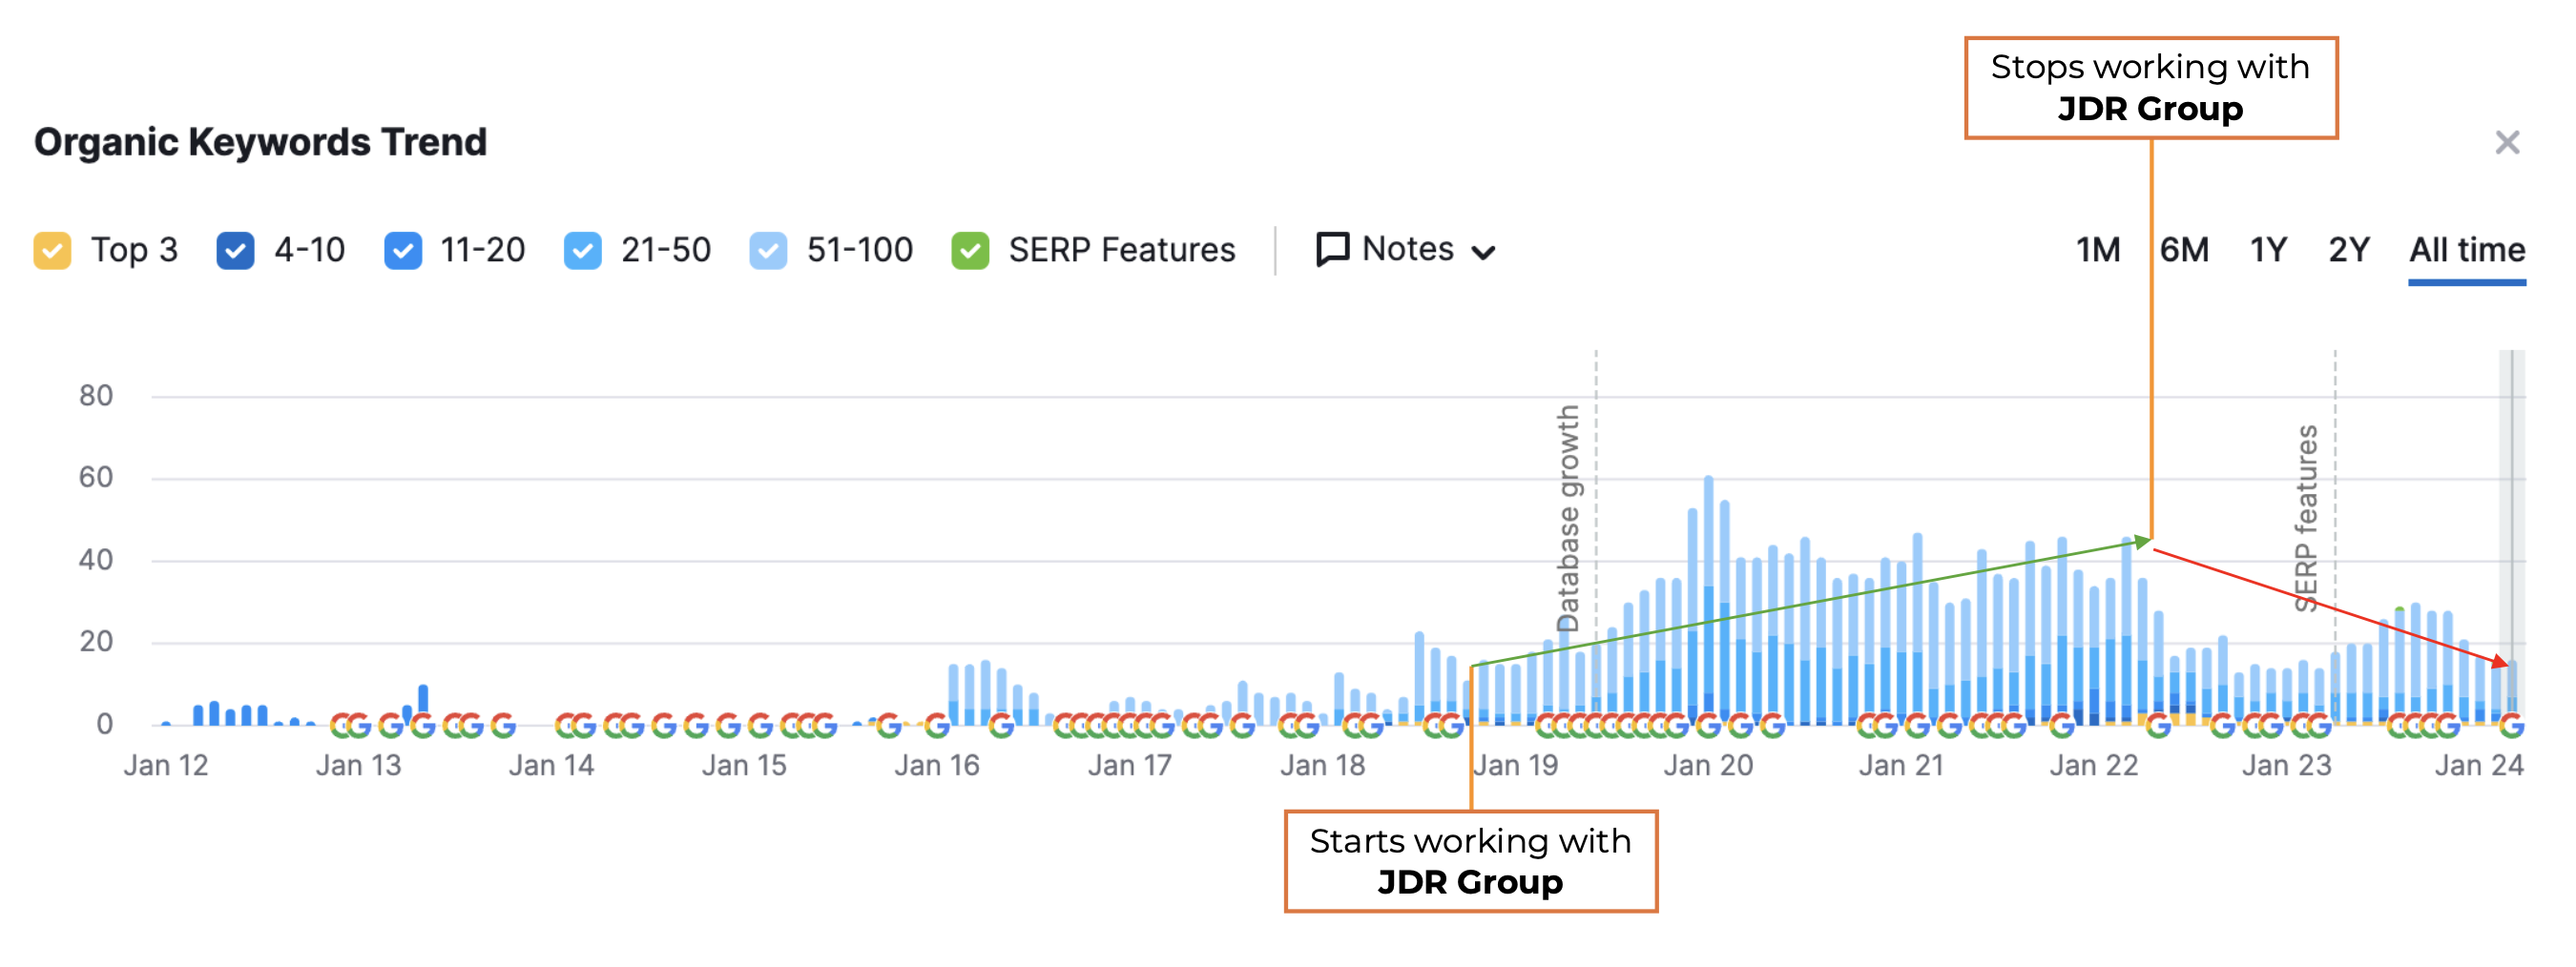 JDR Group Case Study - before and after stopping inbound marketing - 2